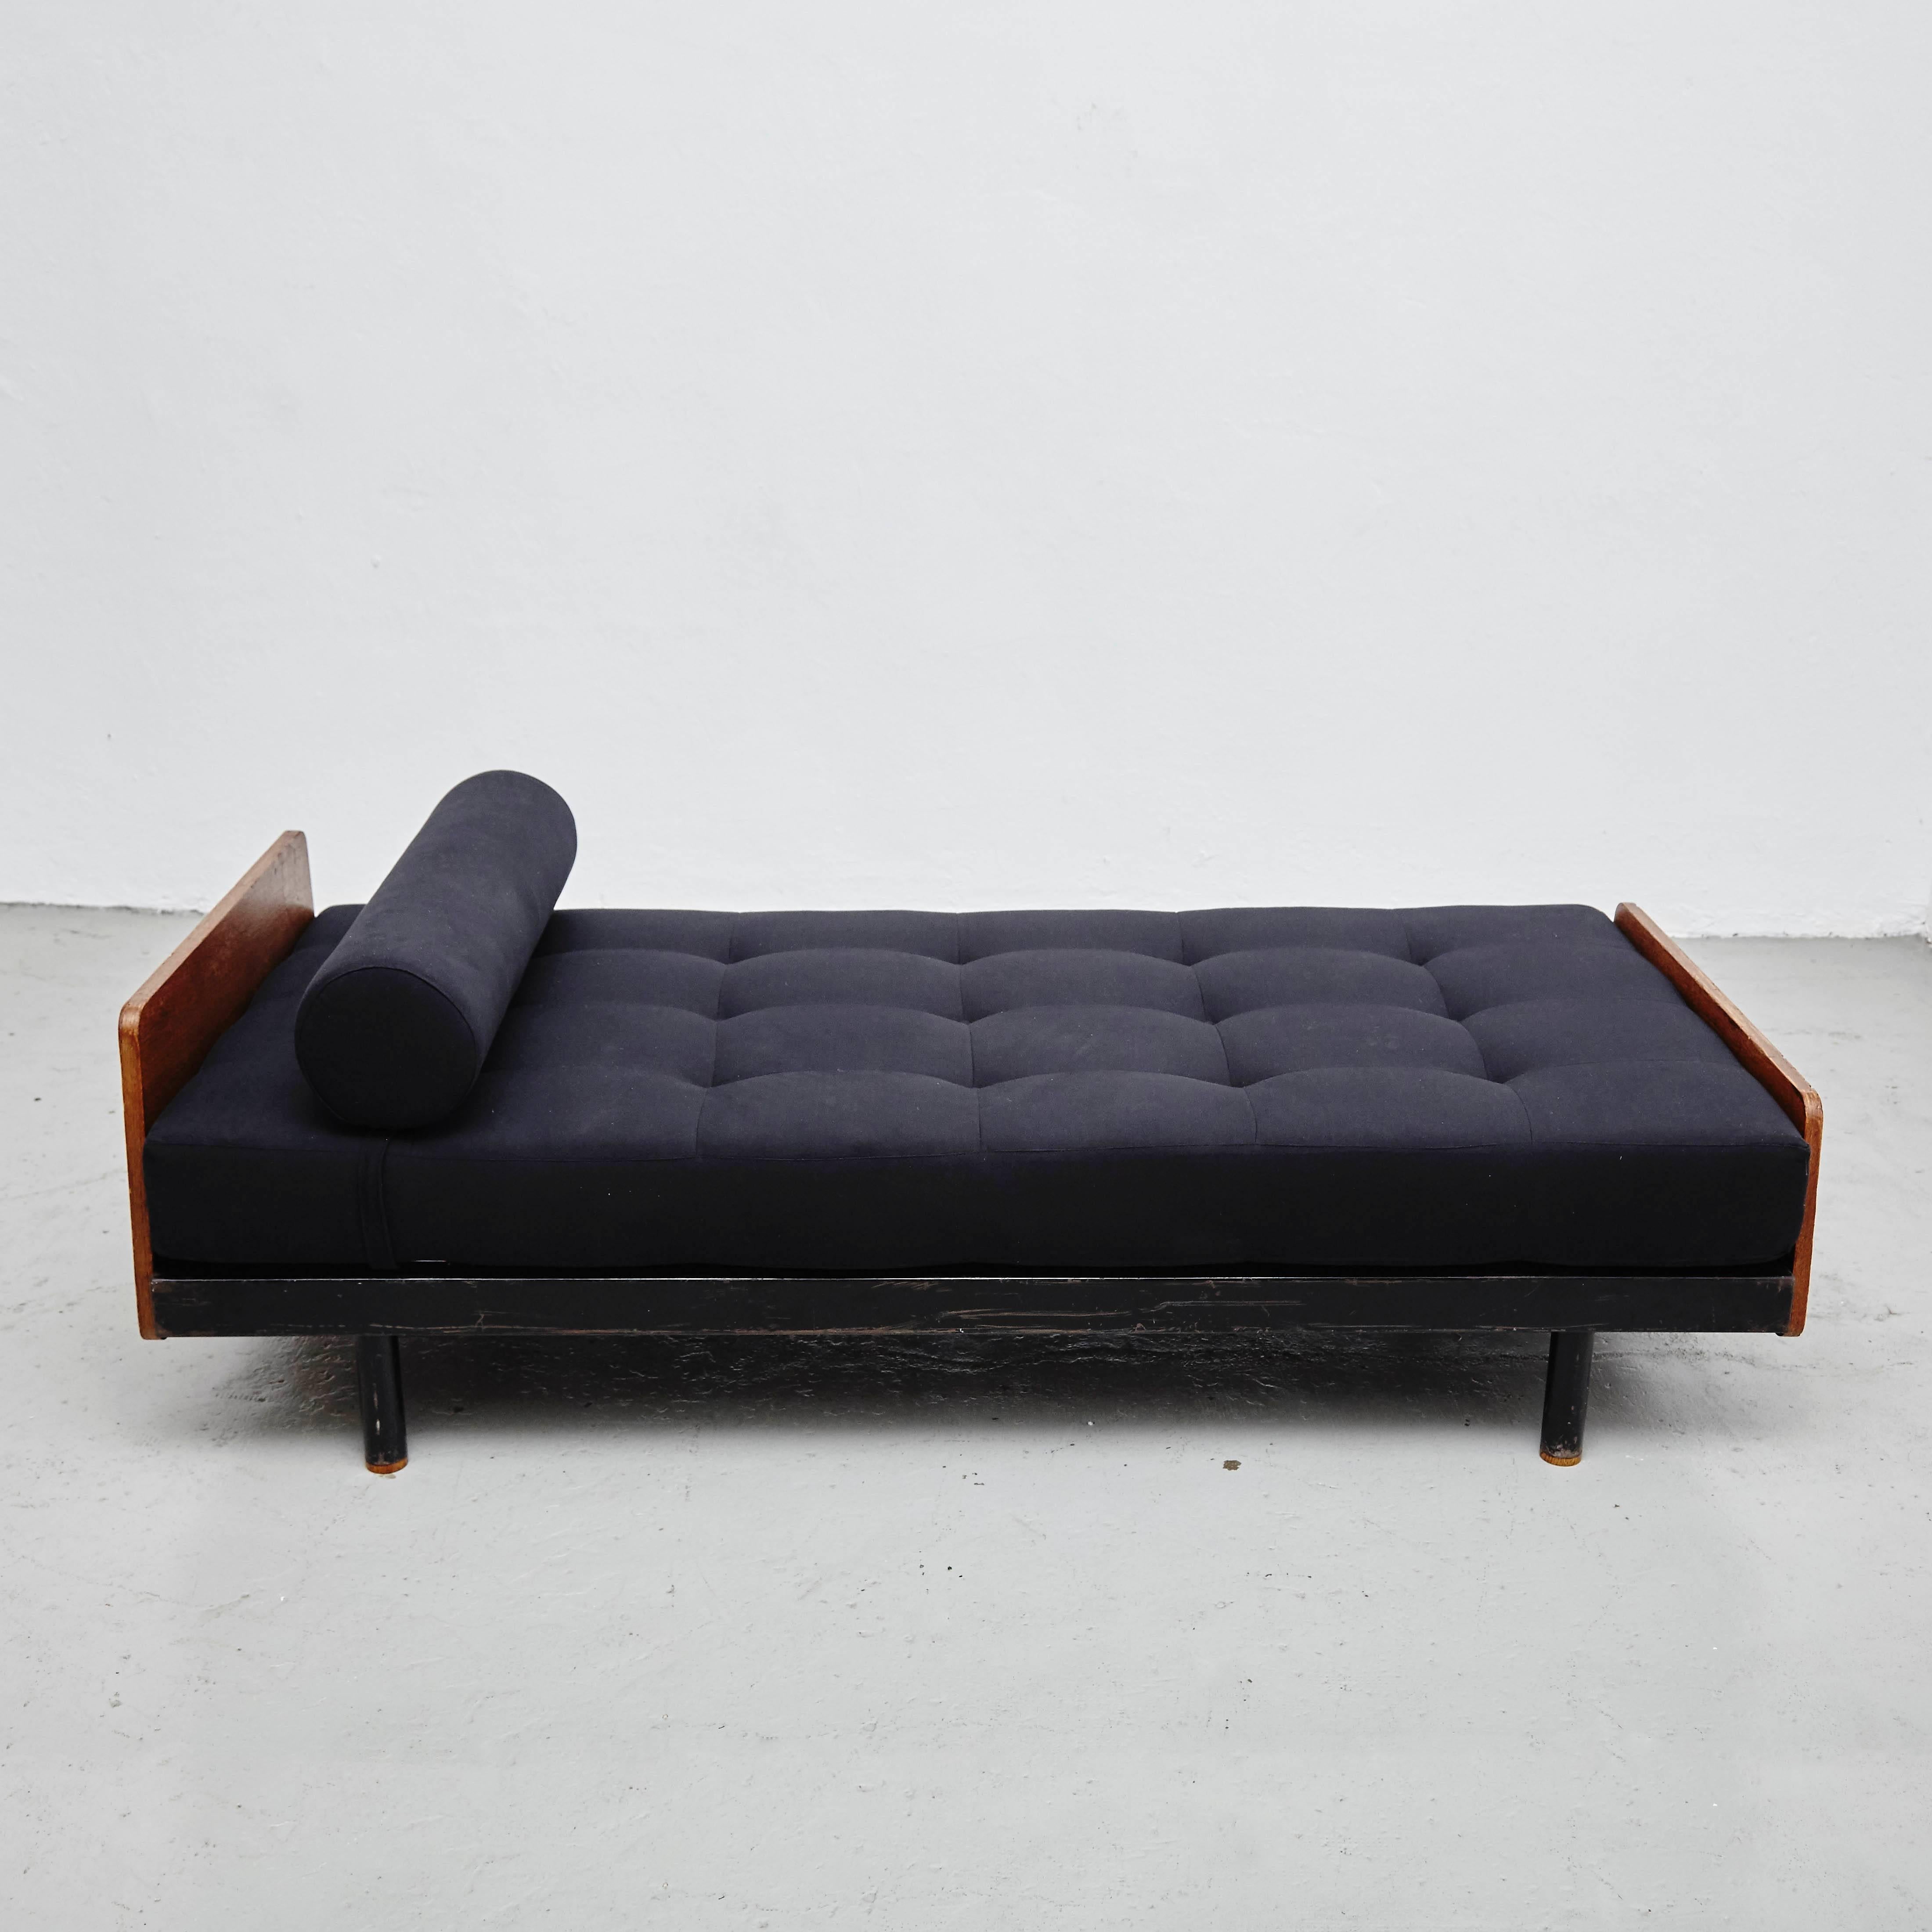 Metal Jean Prouve Daybed, circa 1950